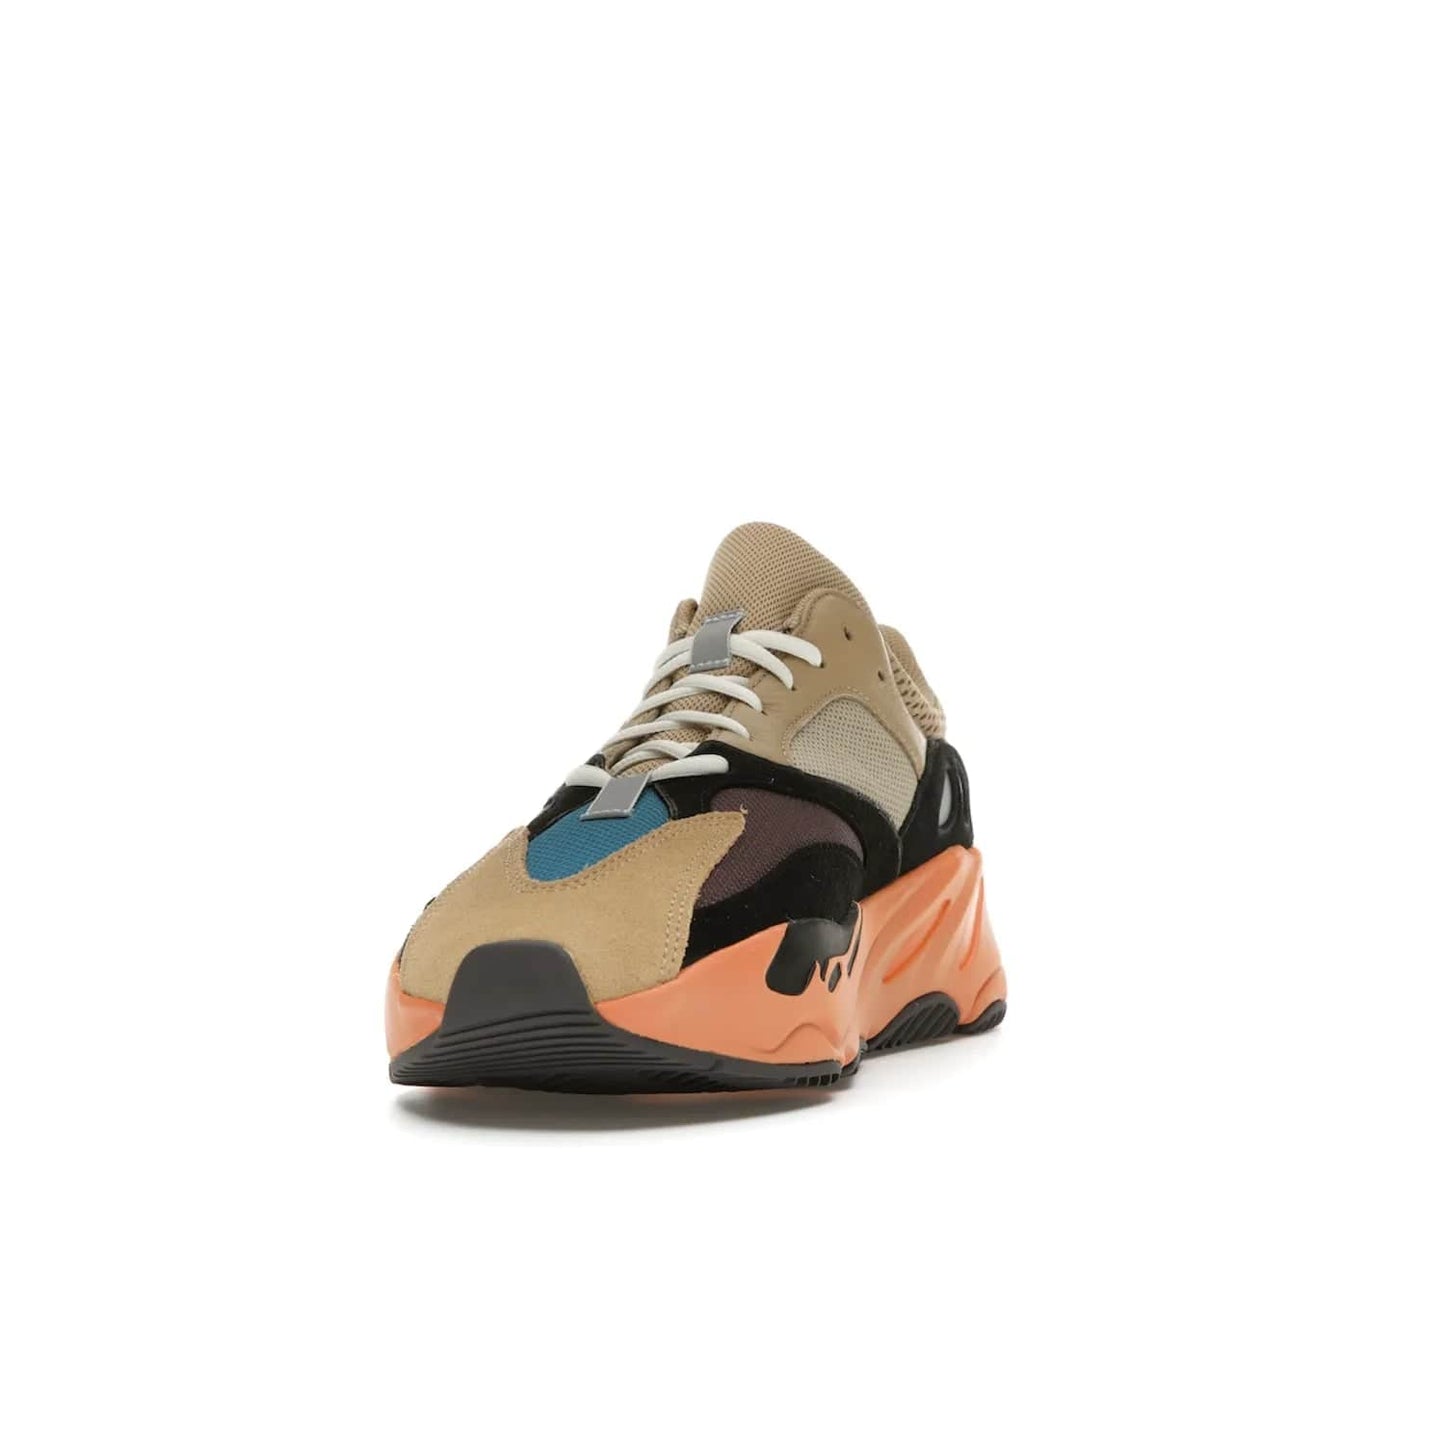 adidas Yeezy Boost 700 Enflame Amber - Image 12 - Only at www.BallersClubKickz.com - Adidas Yeezy Boost 700 Enflame Amber: Eye-catching design with pale yellow, brown, teal, and orange! Get yours in June 2021.